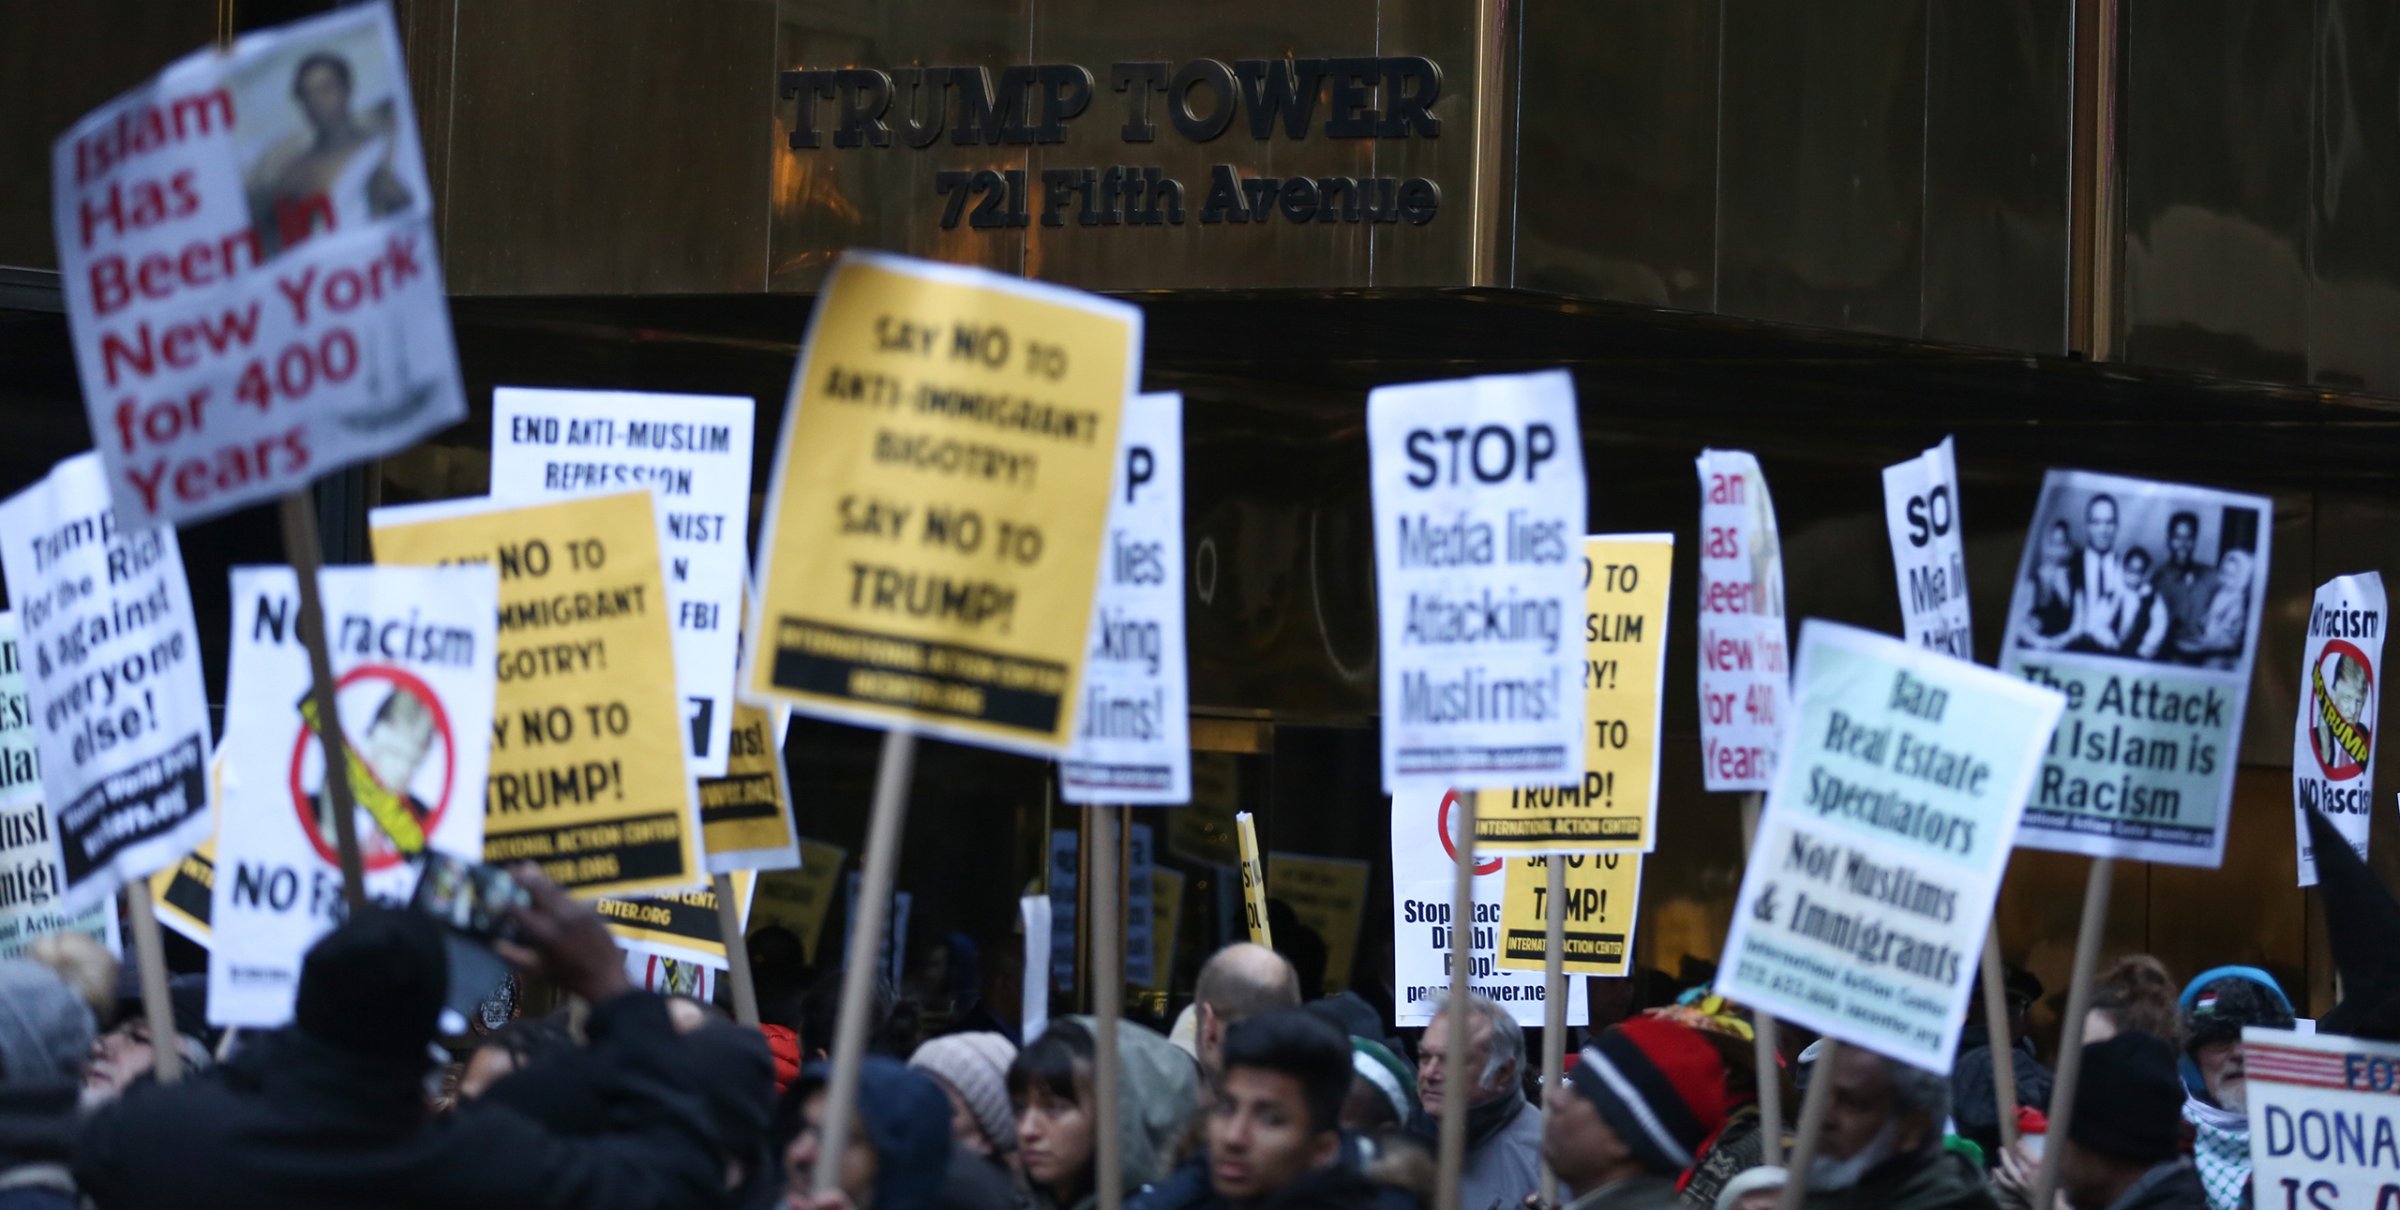 People stage a protest against Donald Trump after he made comments stating that he wants a 'total and complete shutdown of Muslims entering the United States' in front of the Trump Tower at 5th Avenue in New York City on Dec. 20, 2015.